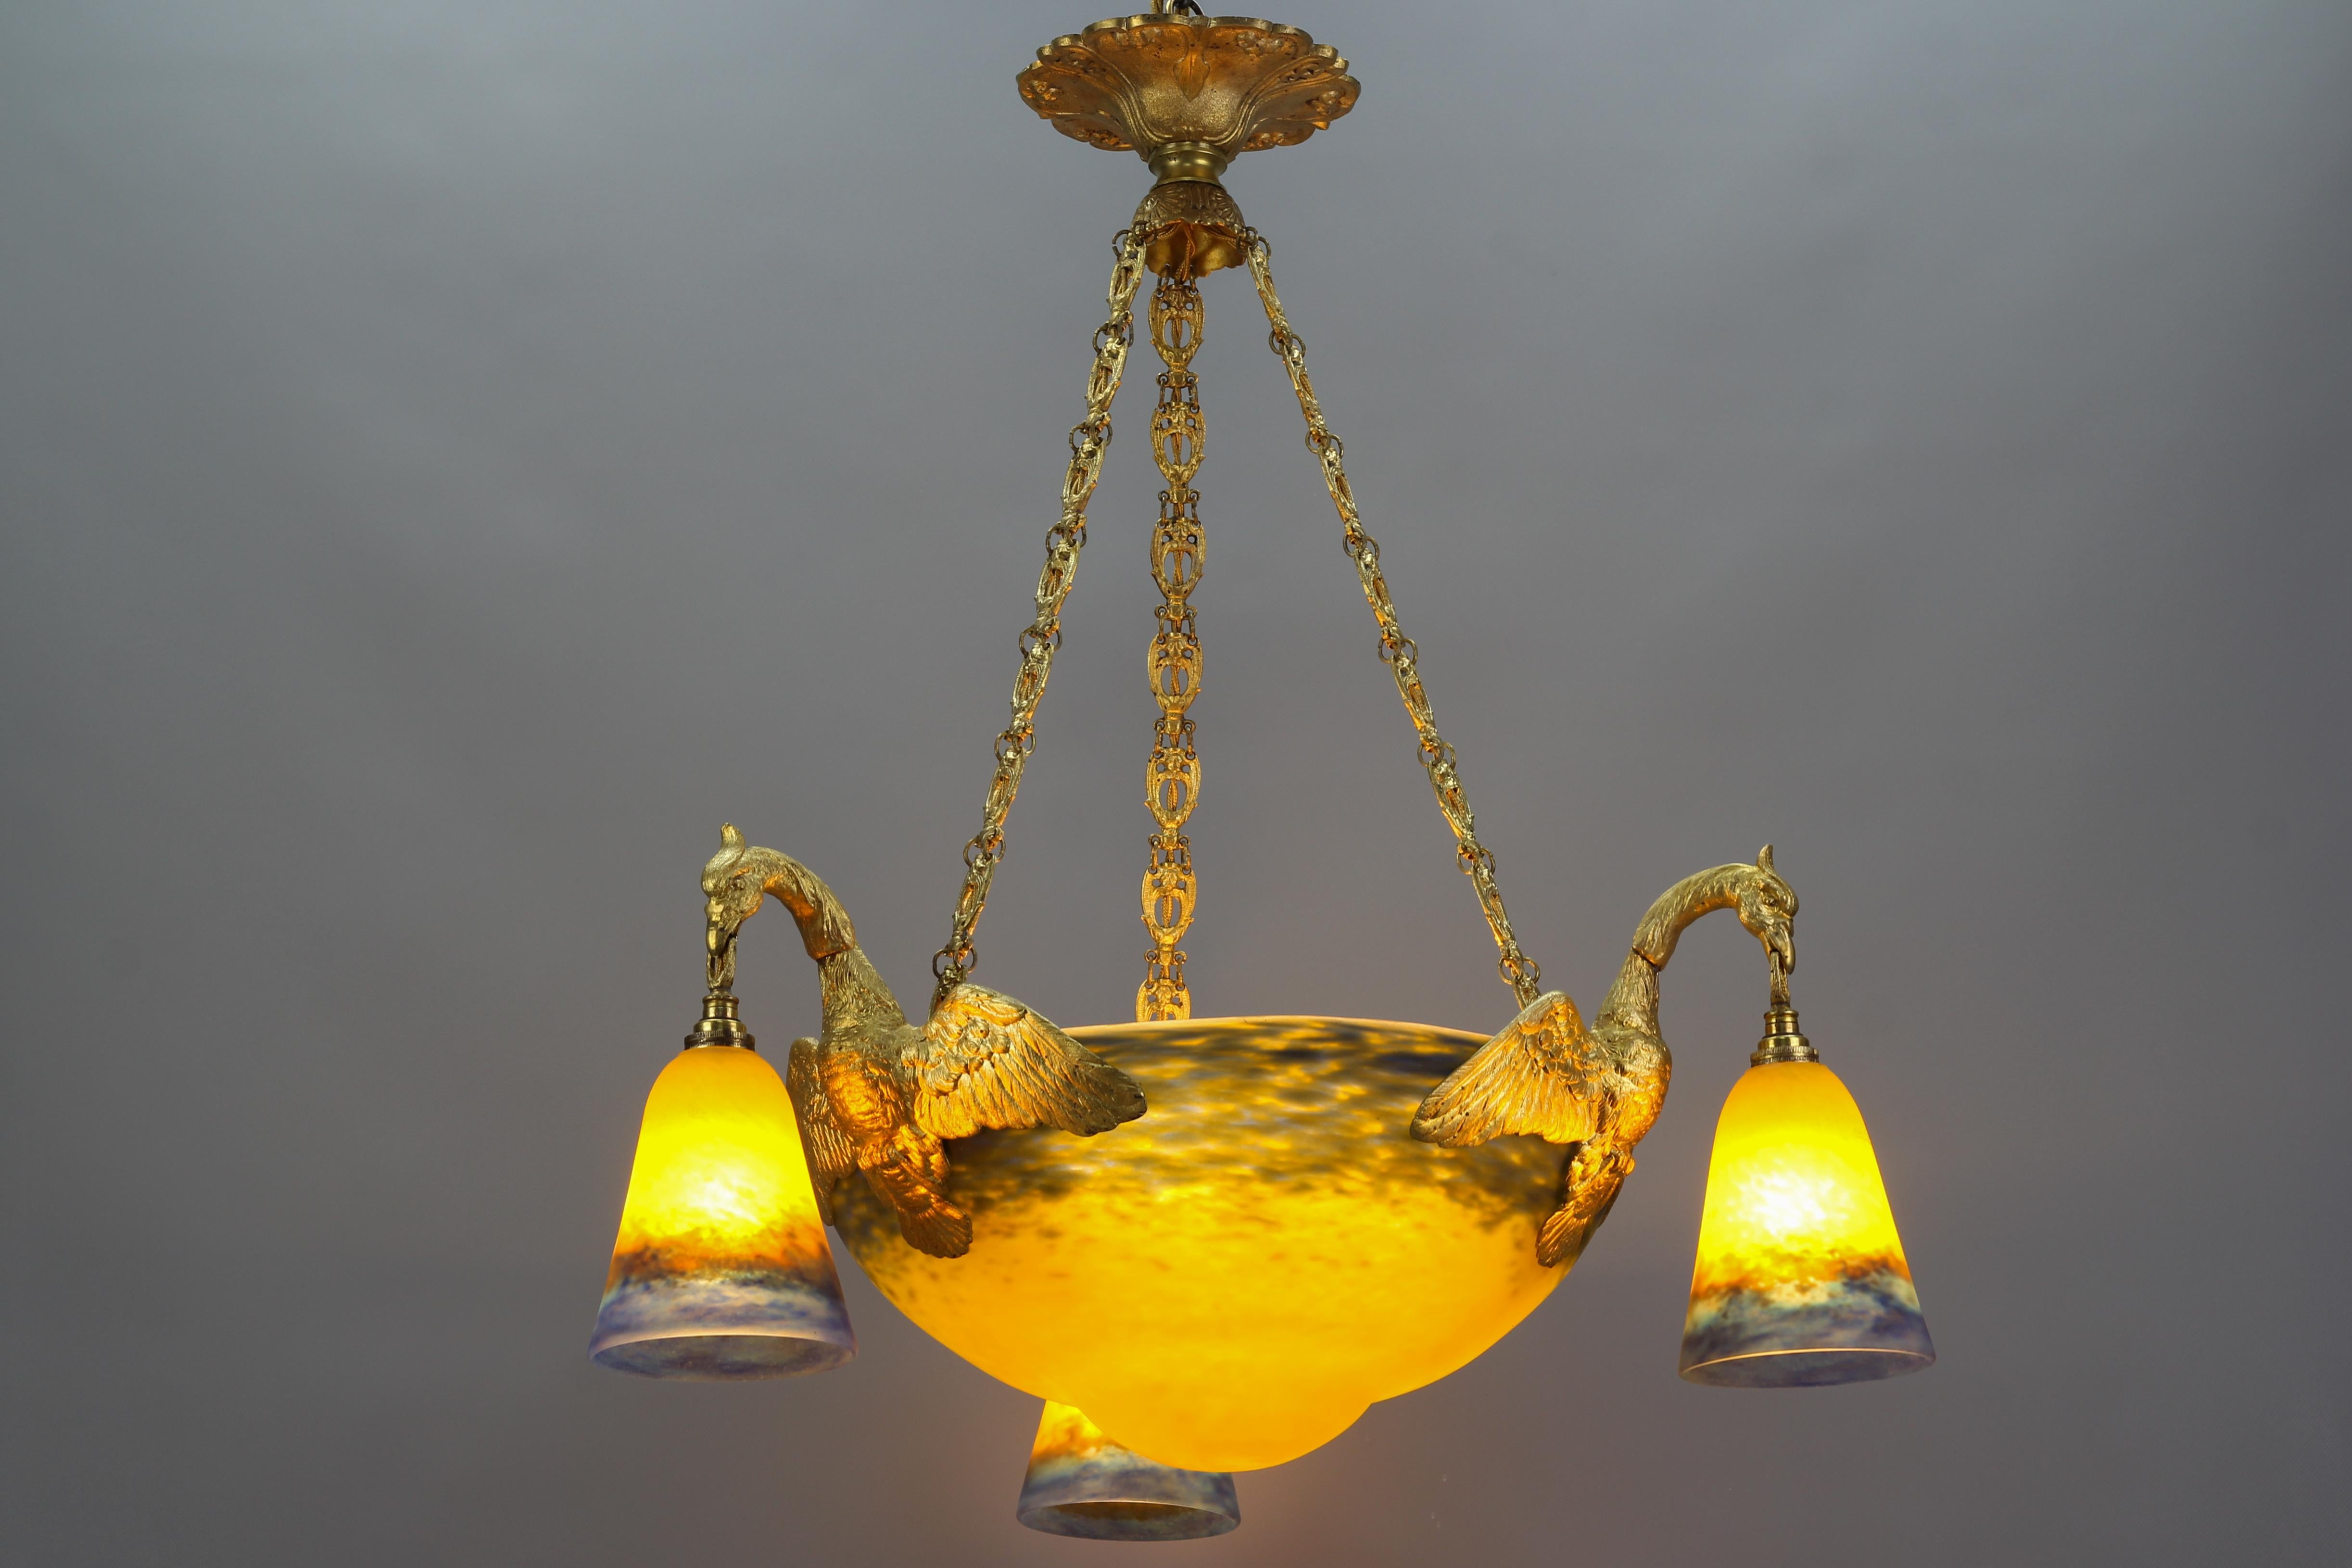 French Art Nouveau gilt bronze and Muller Frères Lunéville glass six-light chandelier, circa 1920.
This impressive French Art Nouveau period chandelier features a mottled “Pâte de Verre” central, beautifully shaped glass bowl in yellow and blue